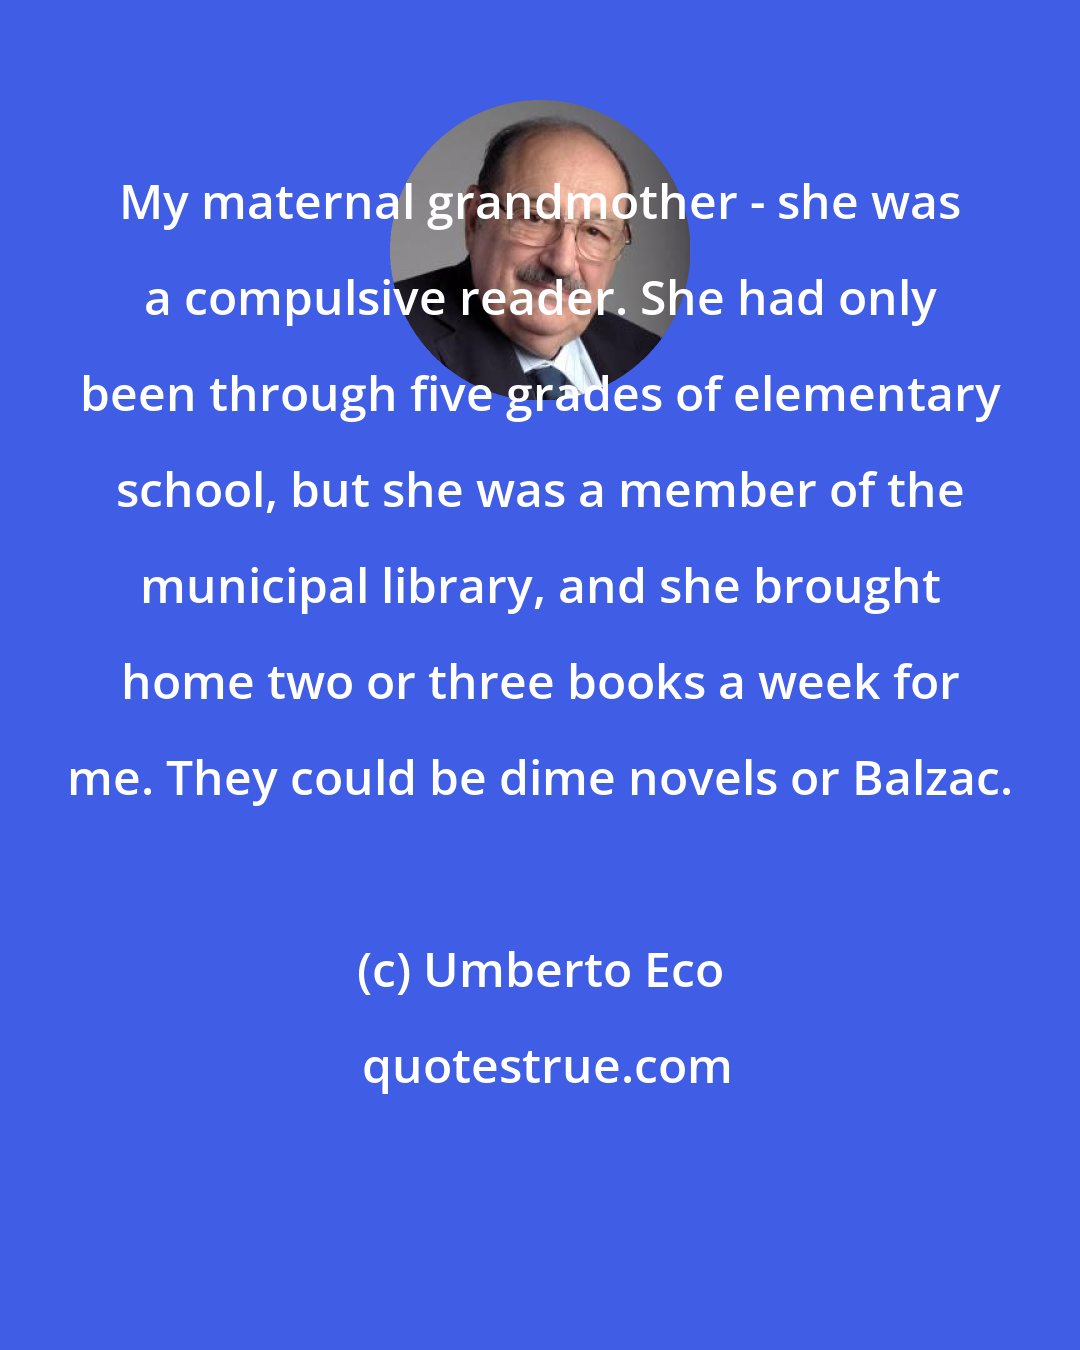 Umberto Eco: My maternal grandmother - she was a compulsive reader. She had only been through five grades of elementary school, but she was a member of the municipal library, and she brought home two or three books a week for me. They could be dime novels or Balzac.